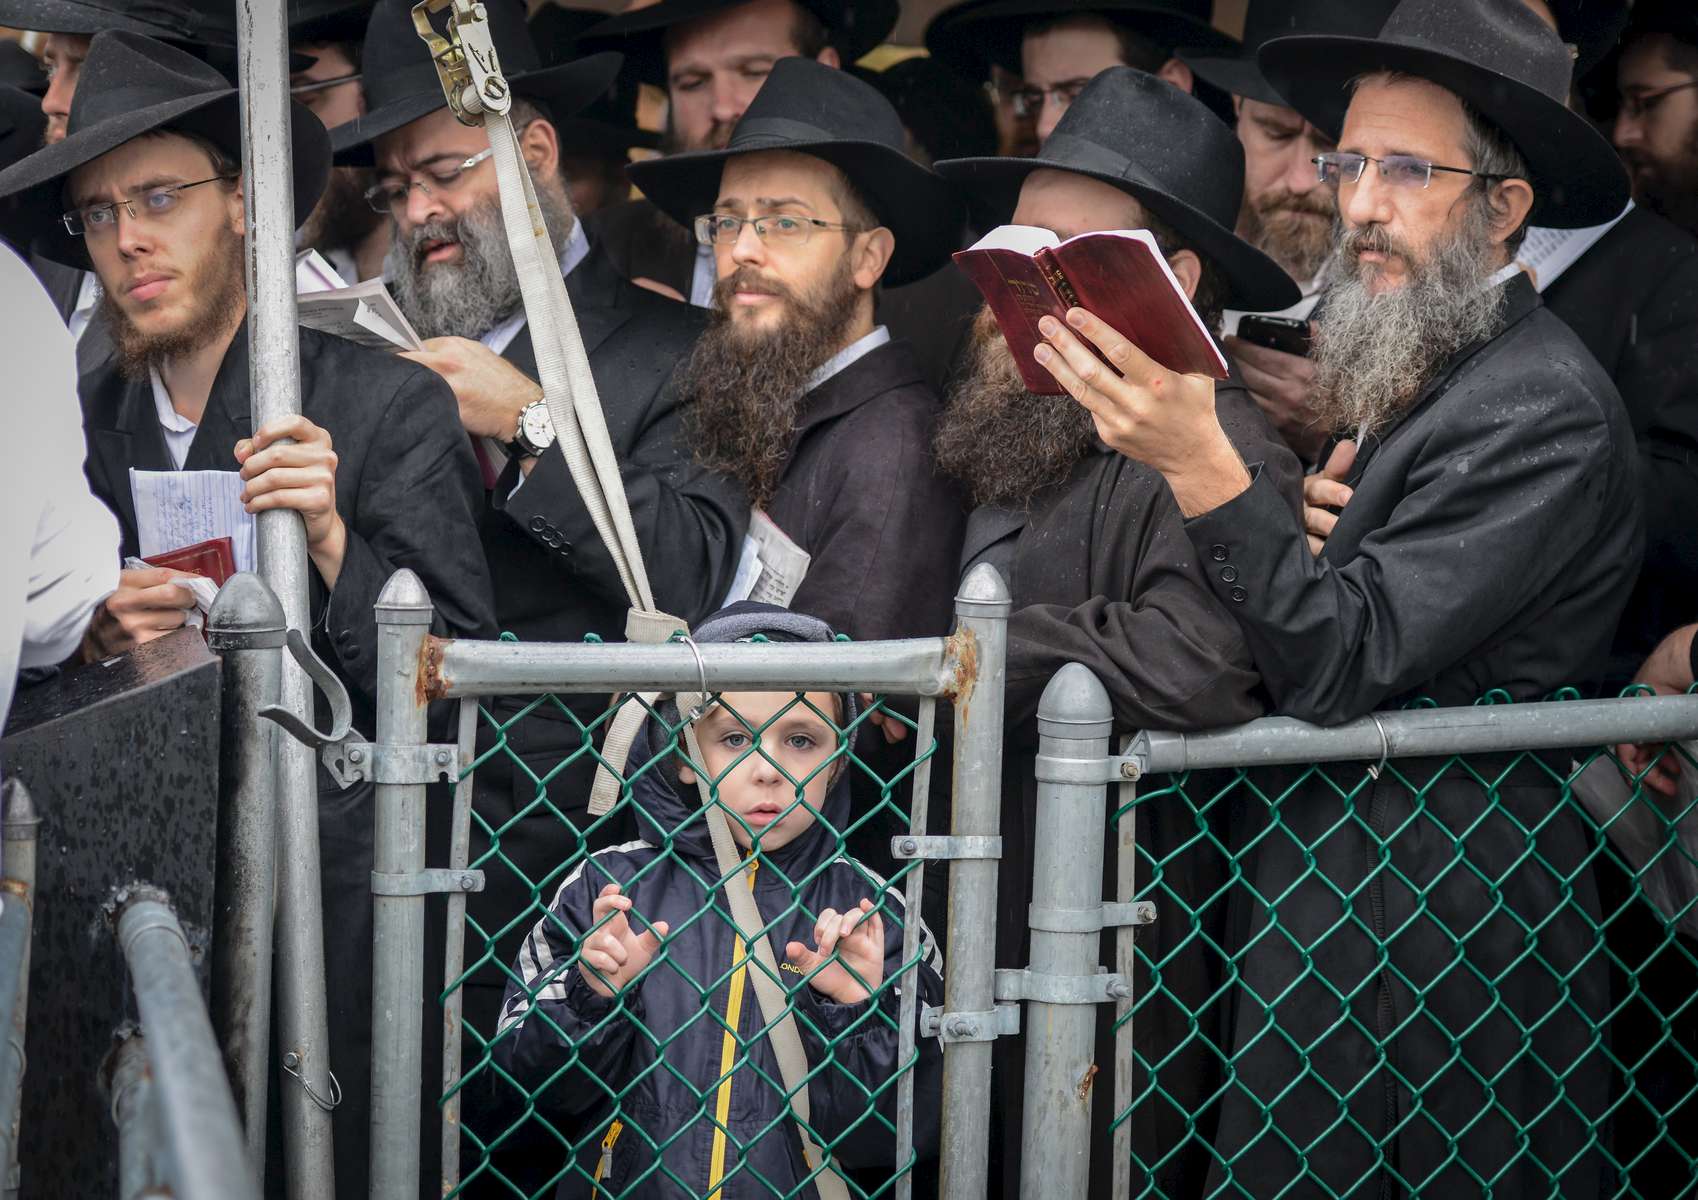 A kid looks on from behind the fence as he joins rabbis from around the world wait on line to pray at the gravesite of the Labavitcher Rebbe, Rabbi Manachem M. Schneerson at Old Montefiore Cemetery located at 226-20 Francis Lewis Boulevard in Queens on Friday, November 1, 2013. Rabbis from around the world meet in New York for the International Conference of Chabad-Lubavitch Emissaries, an annual event aimed at reviving Jewish awareness and practice around the world.